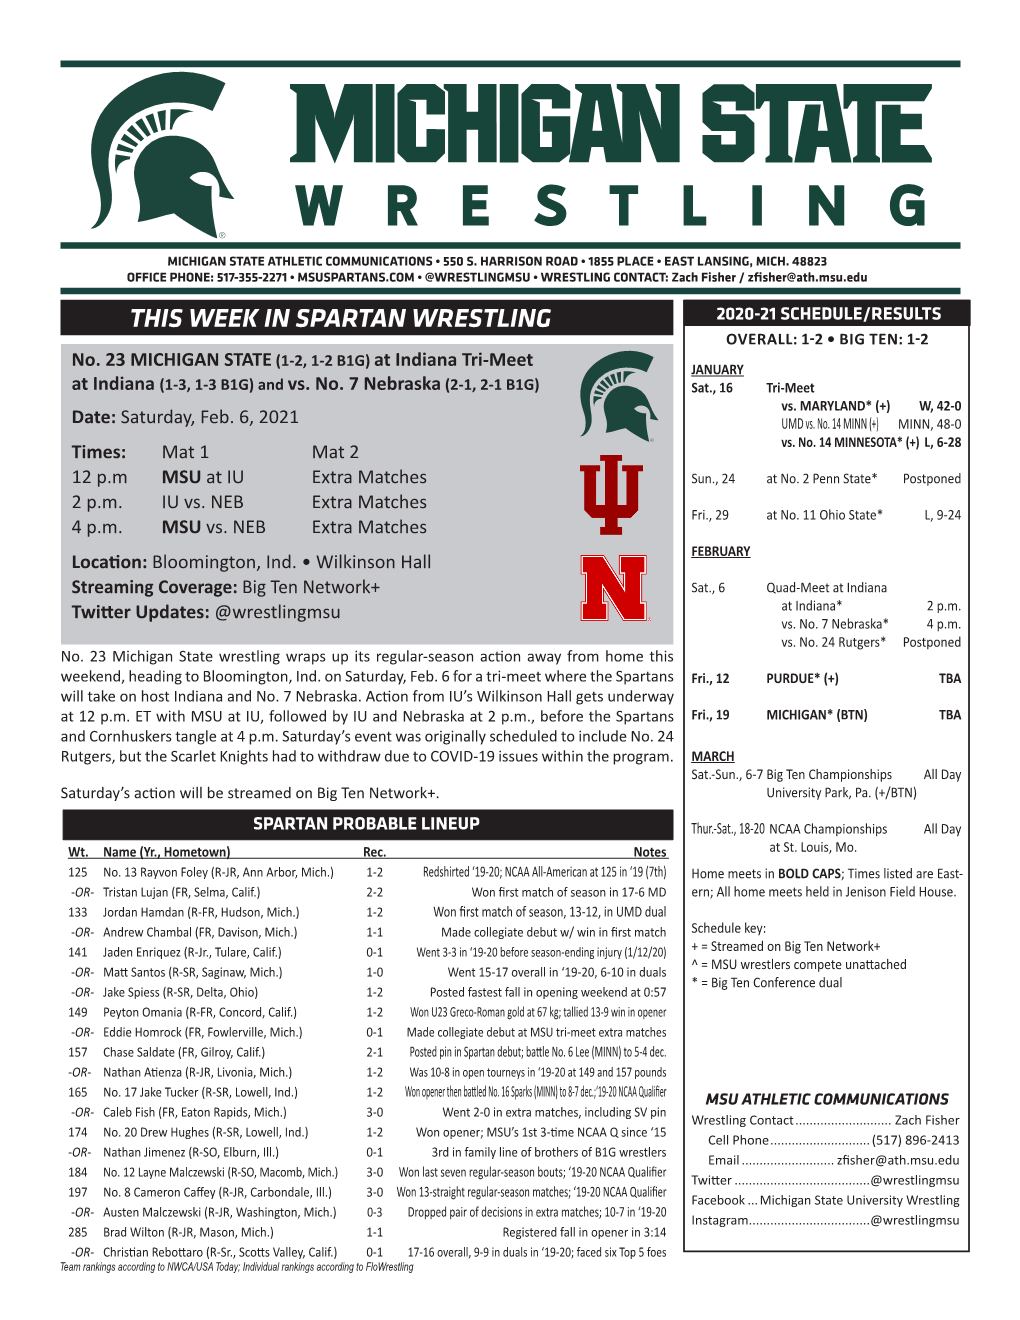 THIS WEEK in SPARTAN WRESTLING 2020-21 SCHEDULE/RESULTS OVERALL: 1-2 • BIG TEN: 1-2 (1-2, 1-2 B1G) No